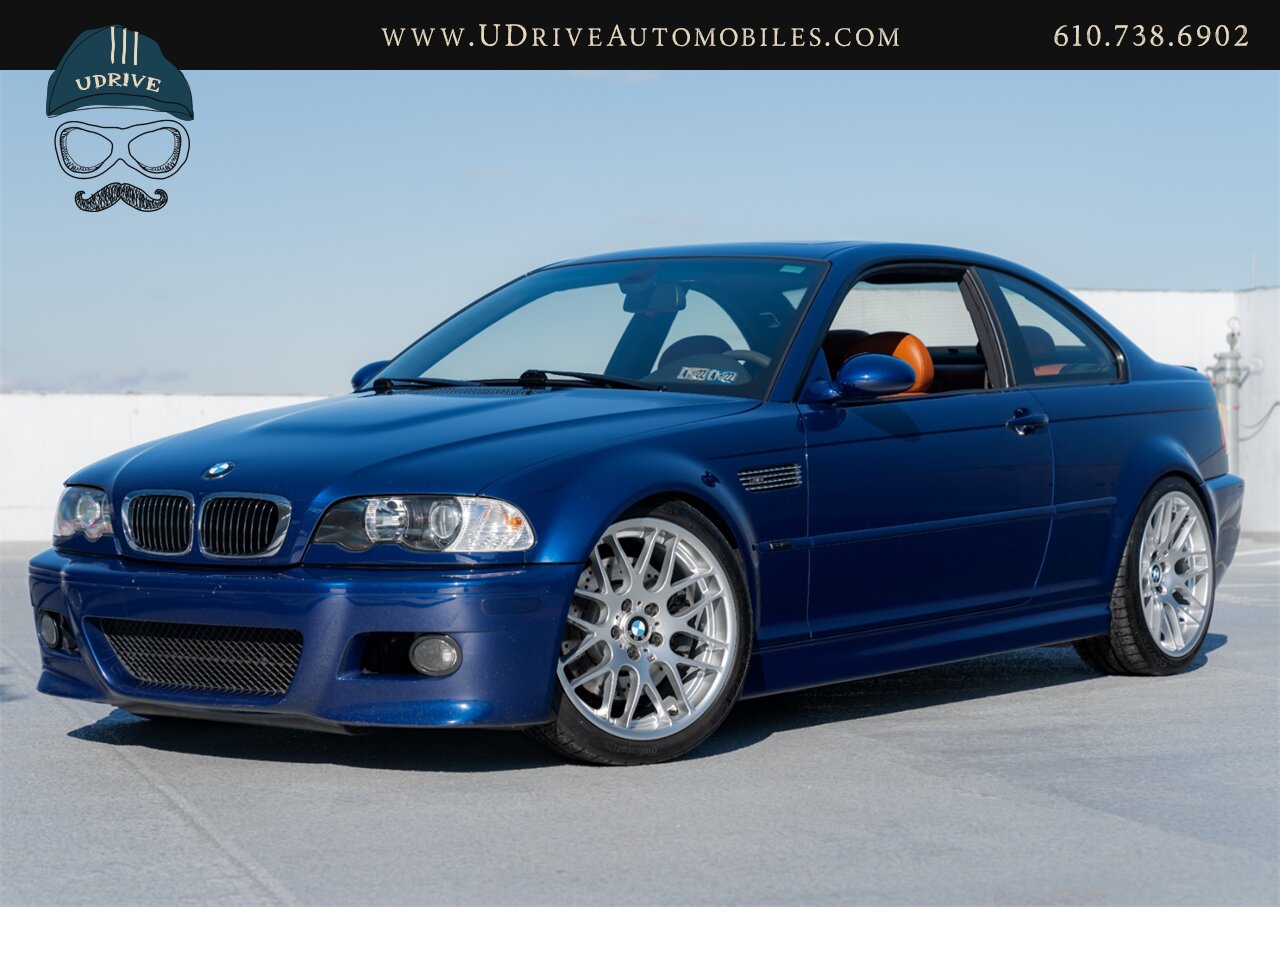 2006 BMW M3 E46 6 Speed Manual Competition Pkg Interlagos Blue  Cinnamon Leather - Photo 1 - West Chester, PA 19382